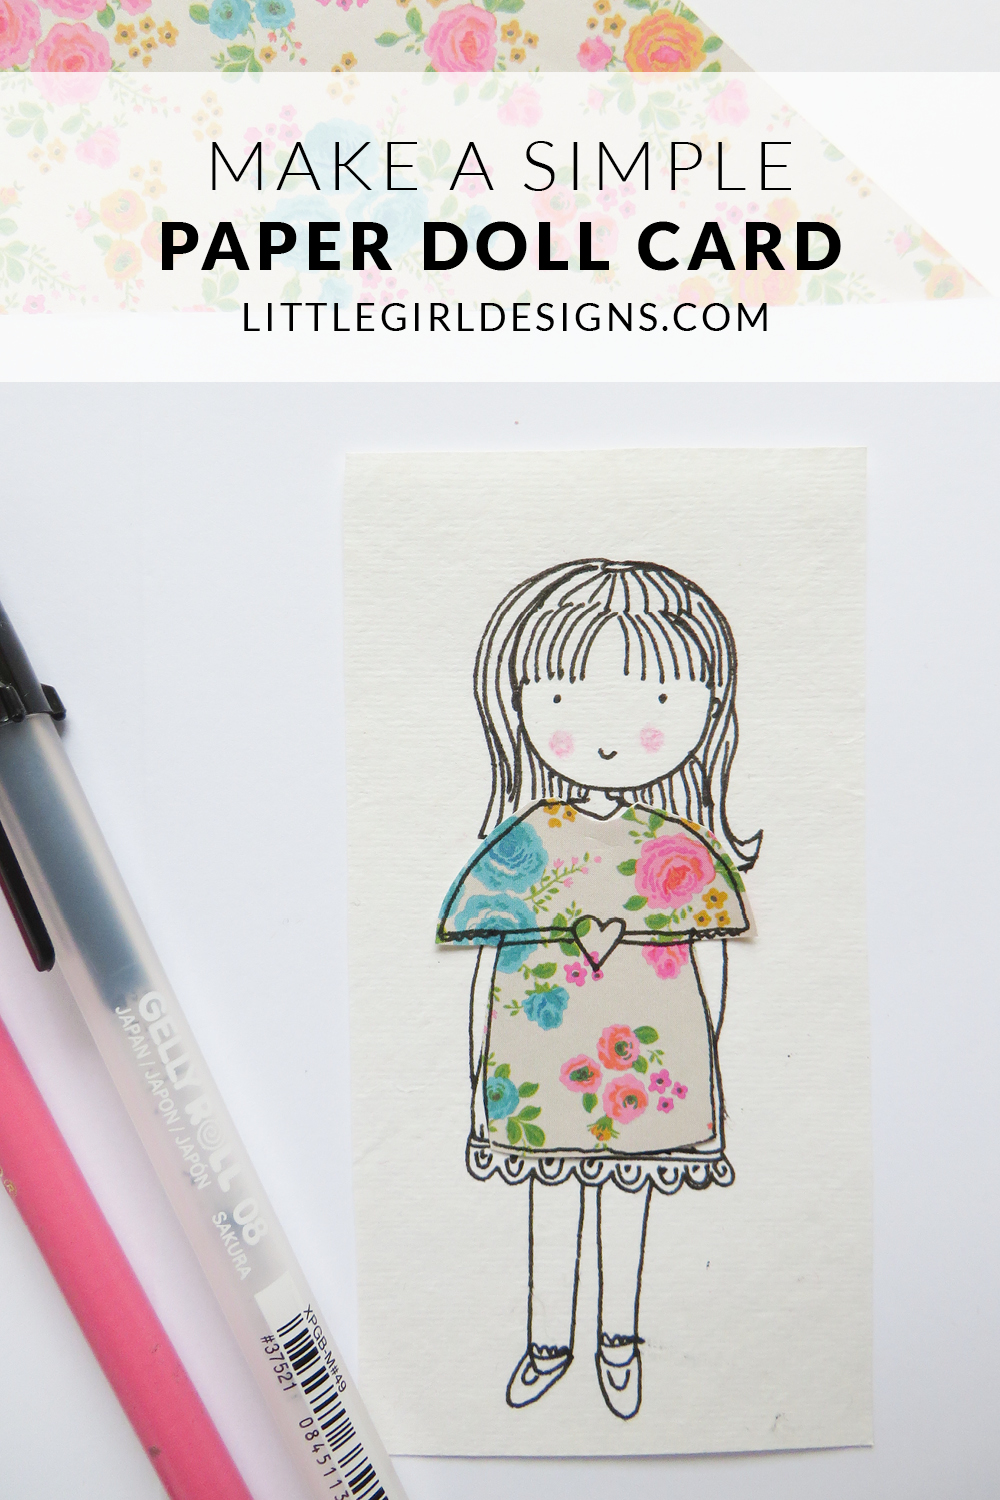 How to Make a Paper Doll card - Use up paper and fabric scraps to make your own paper doll card. Such a sweet idea! via littlegirldesigns.com